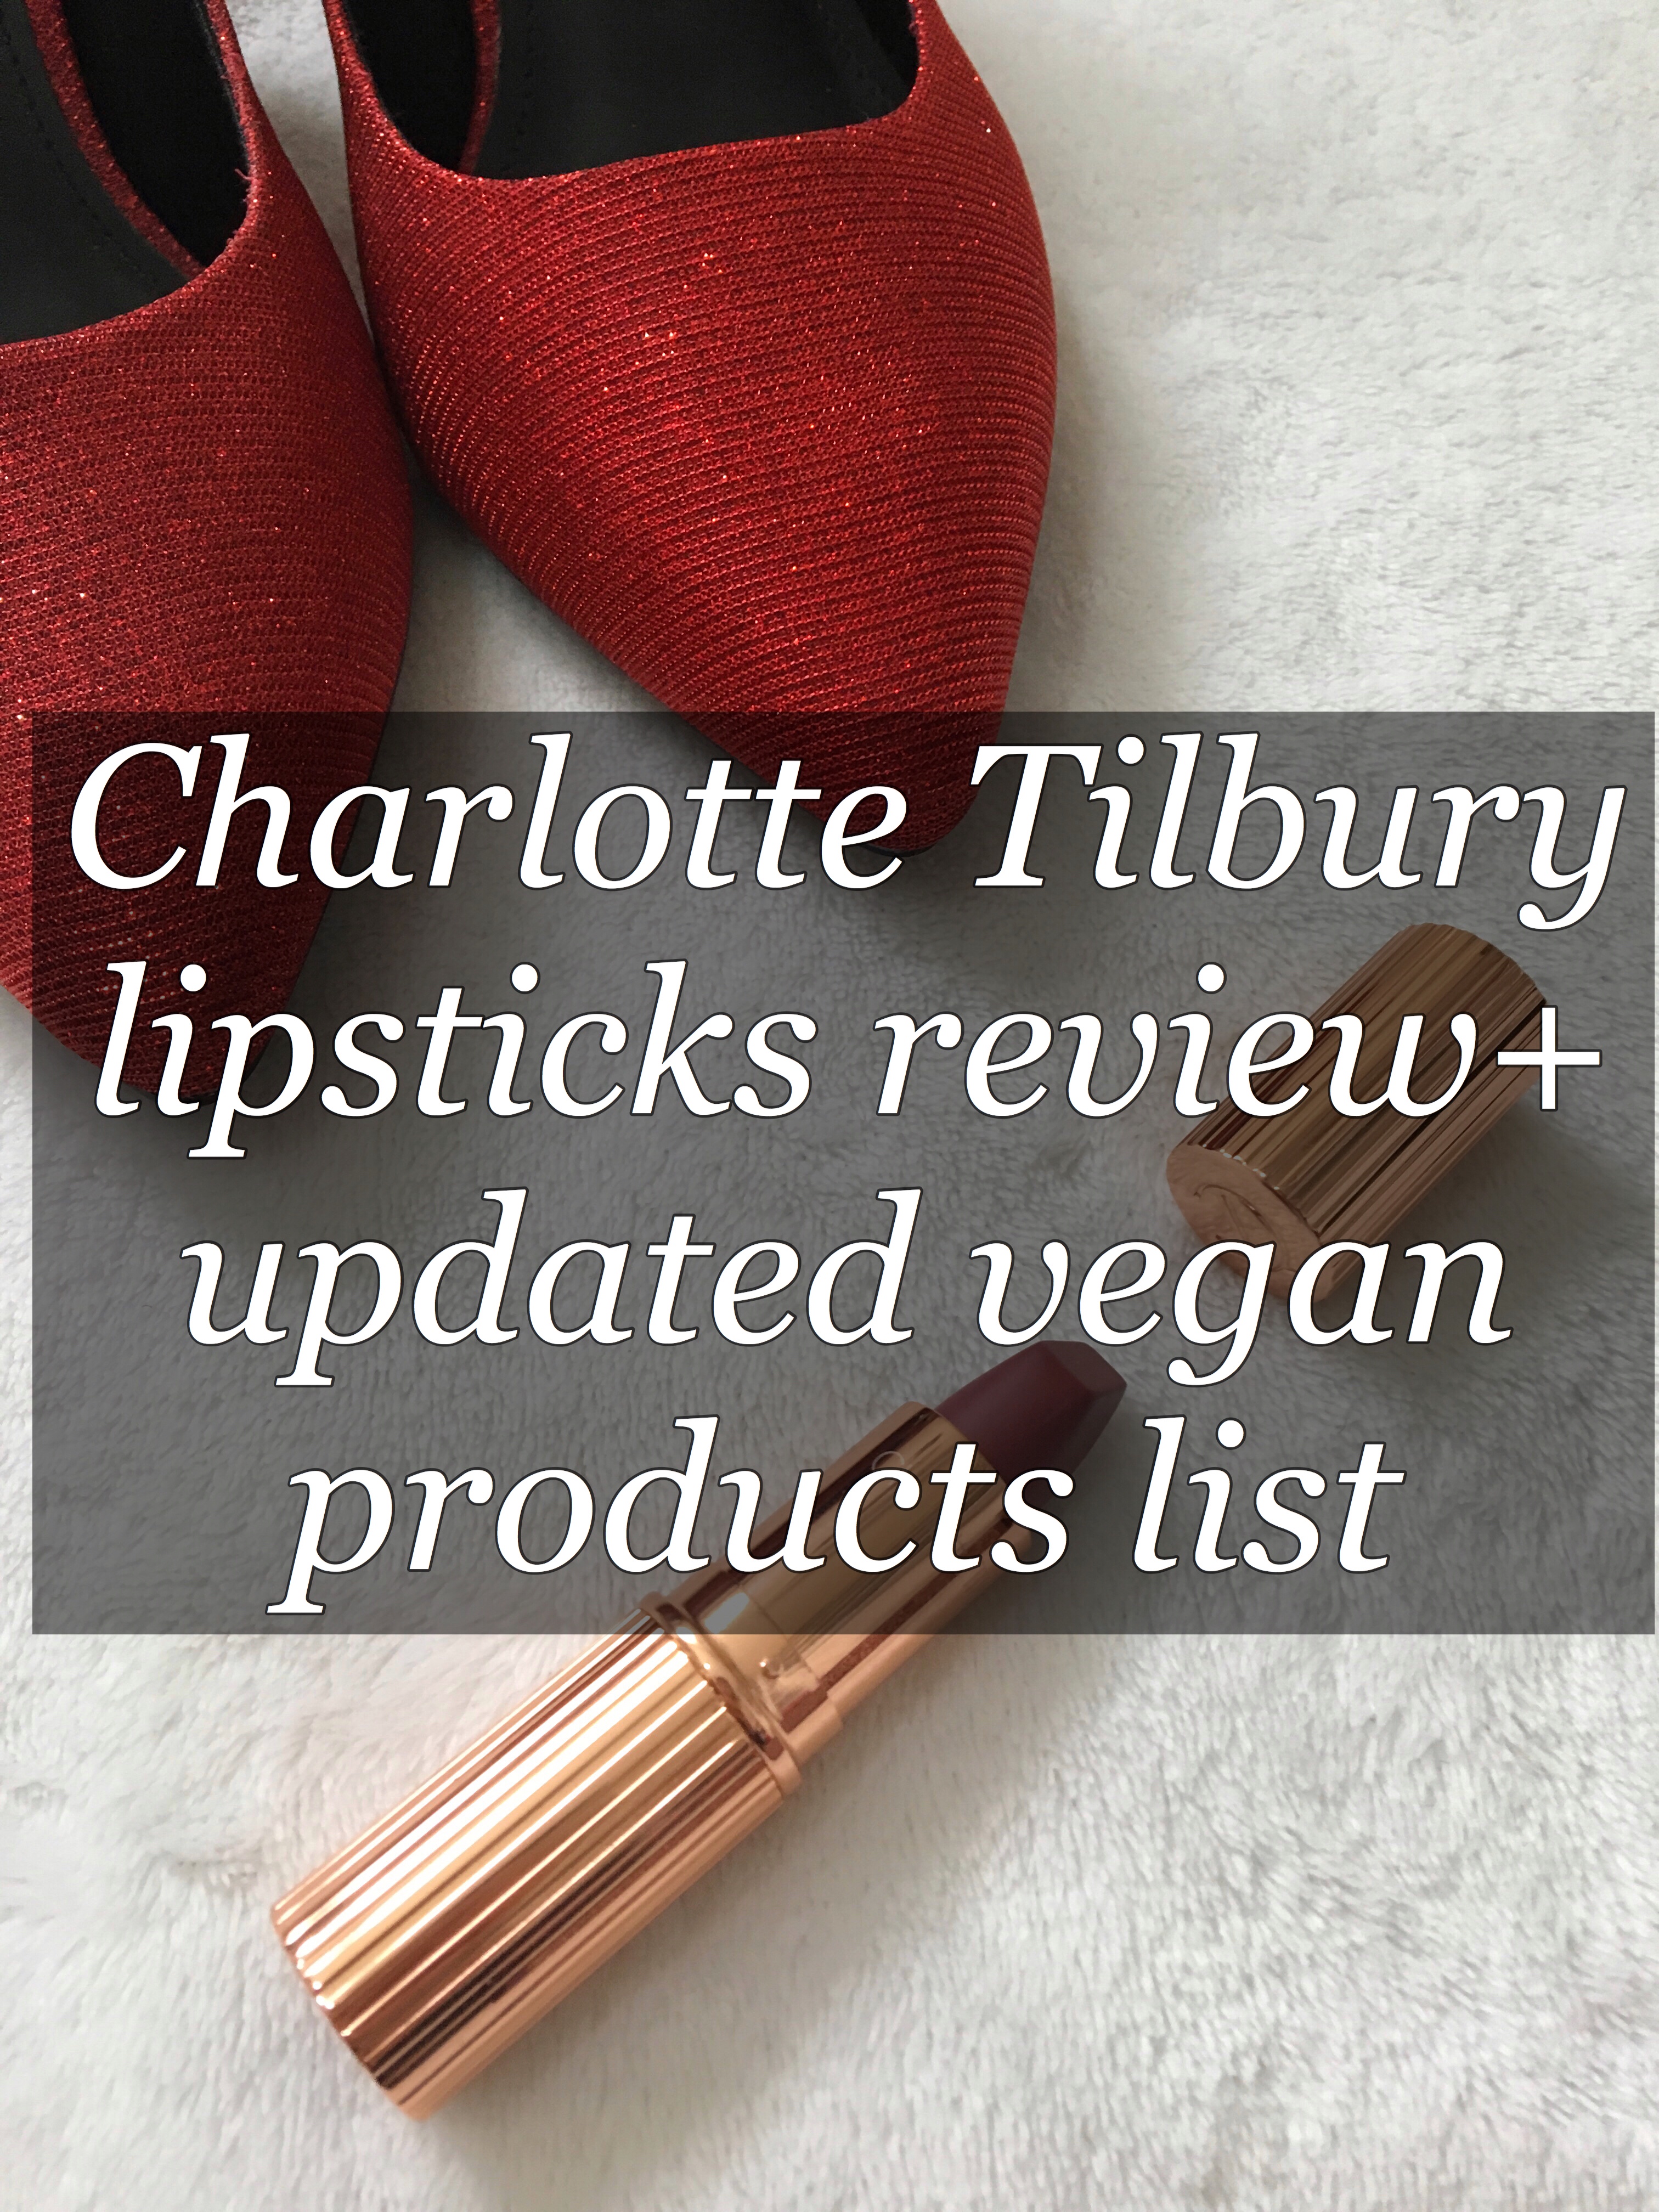 Charlotte Tilbury lipsticks review+ updated vegan products list 2018 stylewithasmile.co